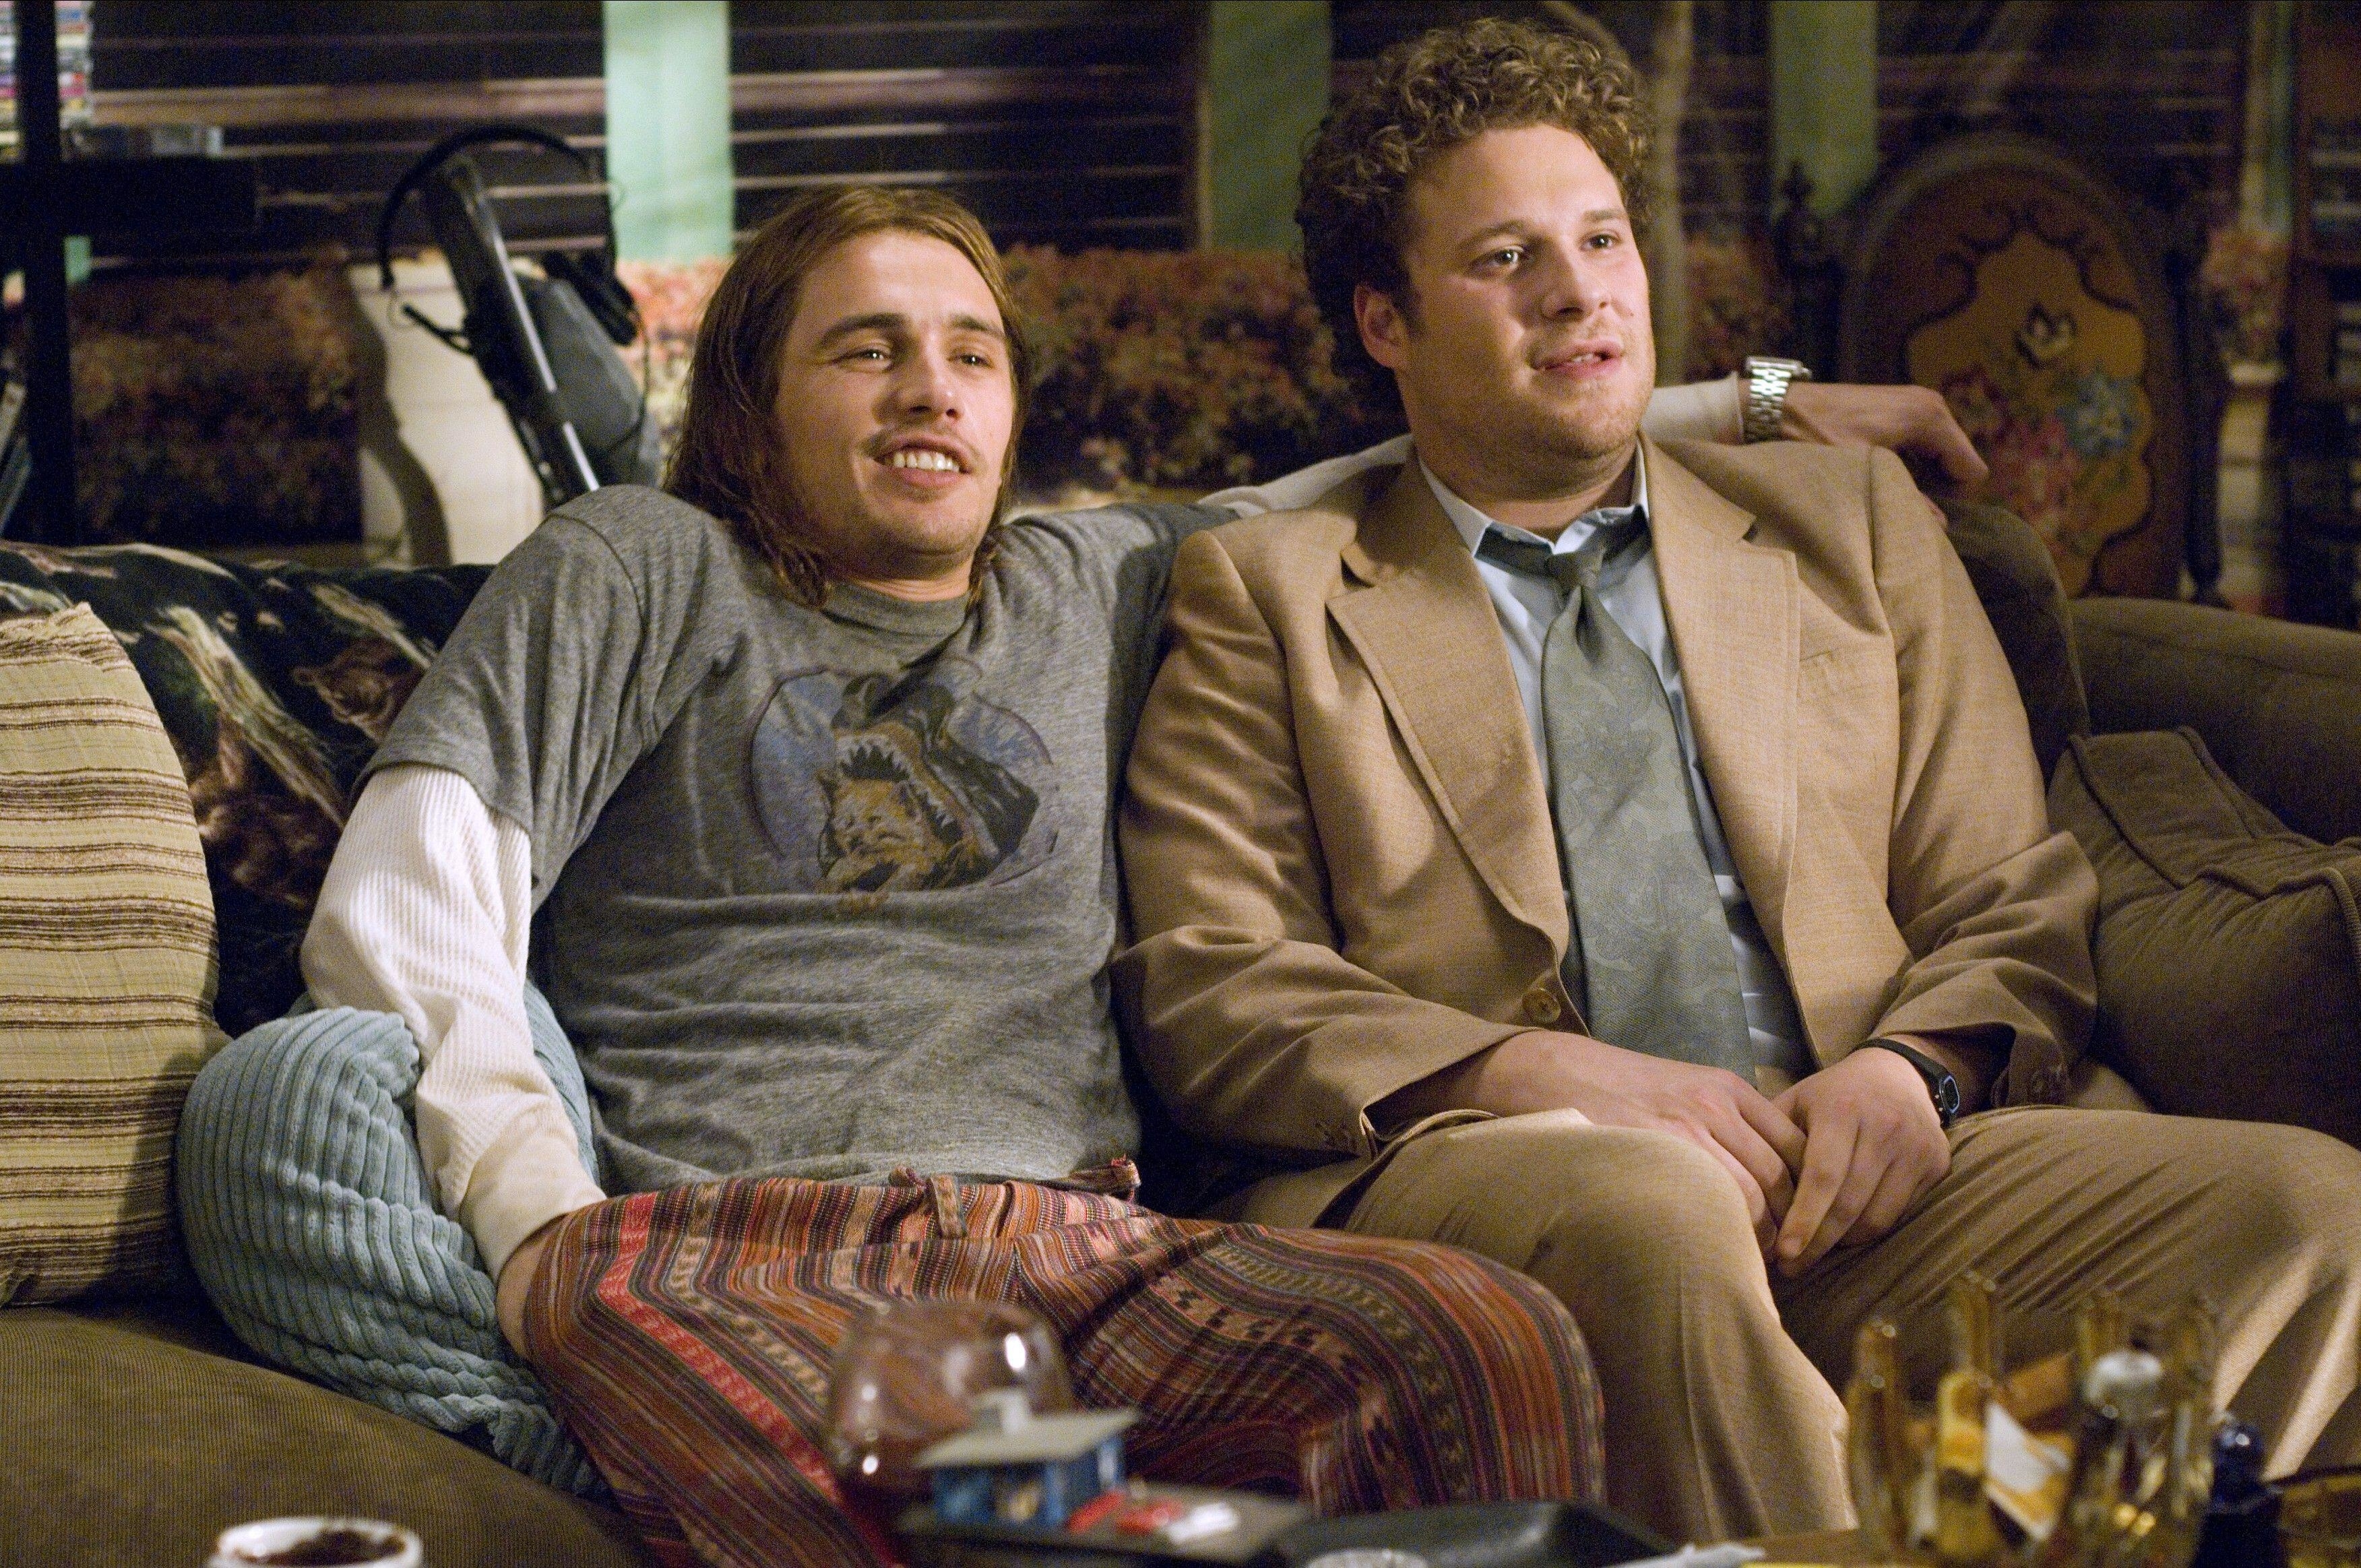 James Franco and Seth Rogen hang out on a couch in &quot;Pineapple Express&quot;